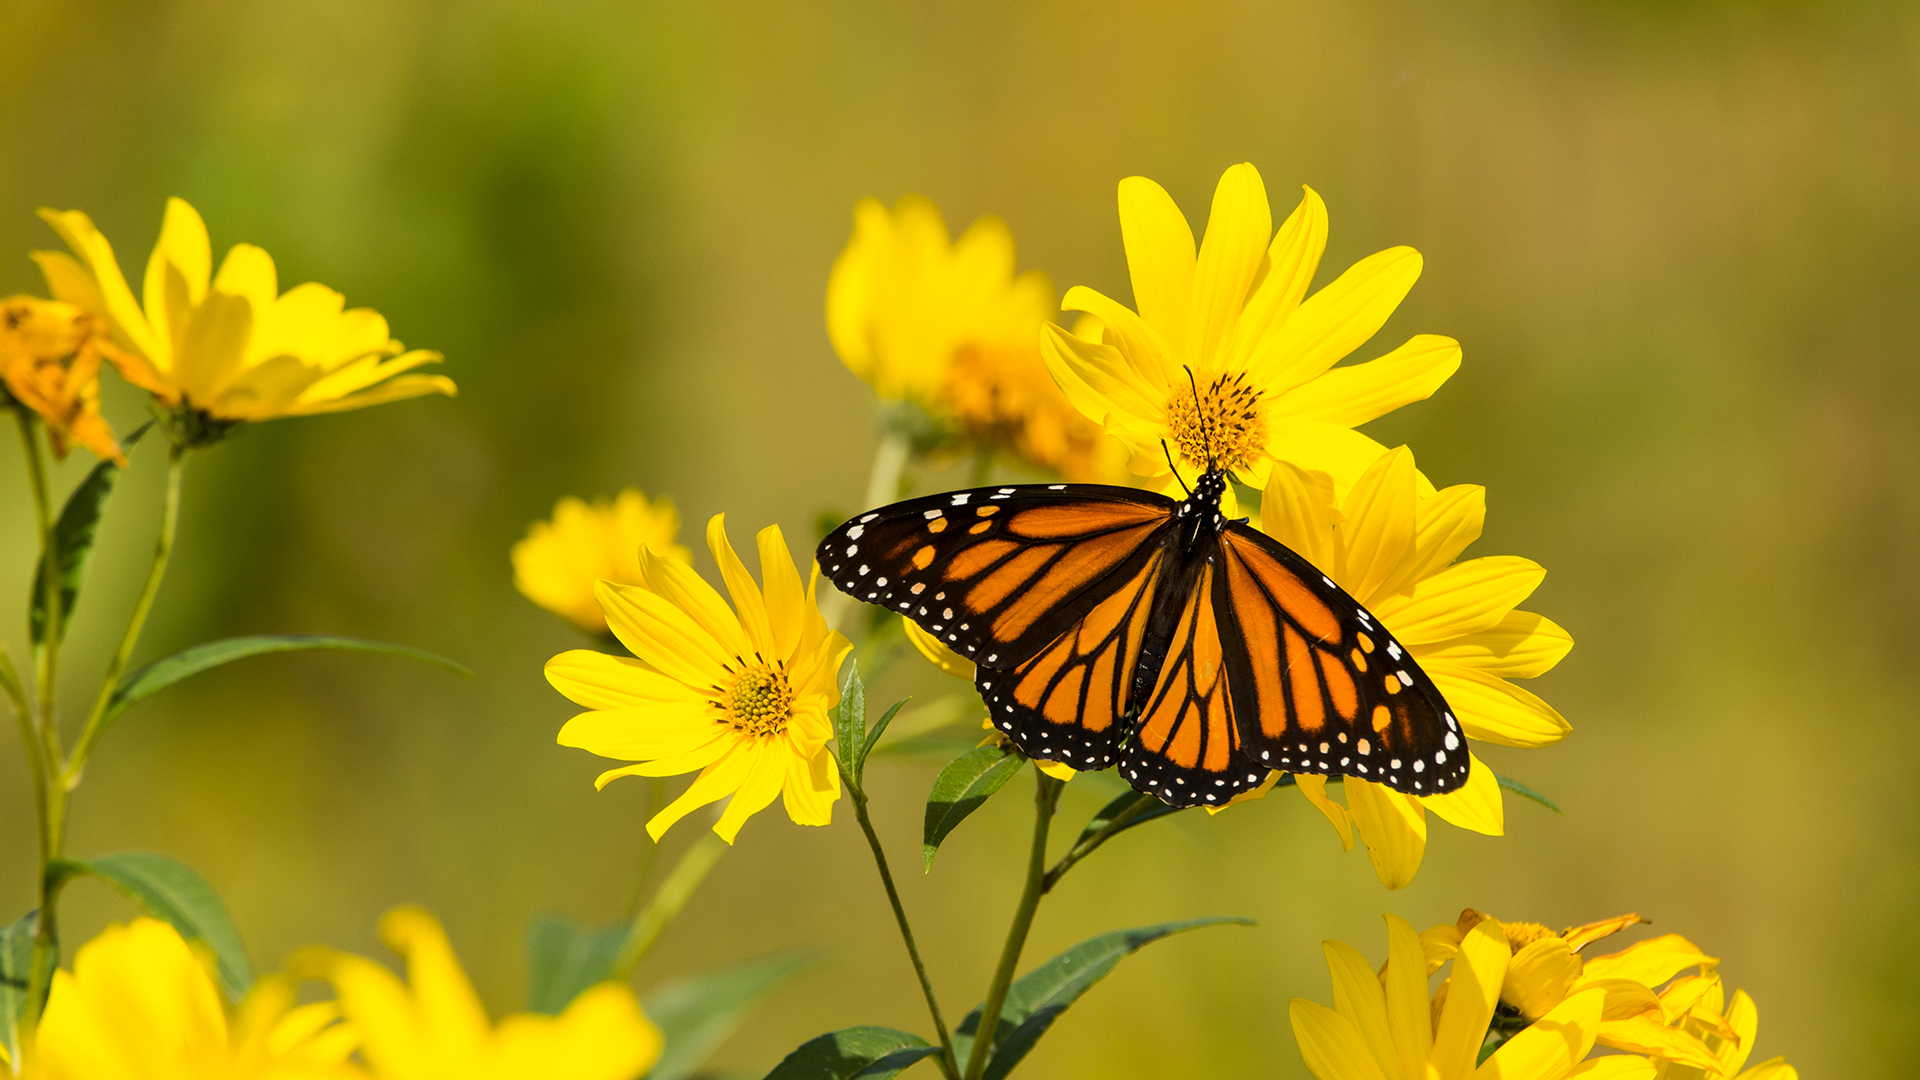 Could the Monarch butterfly help us to understand seasonal depression?